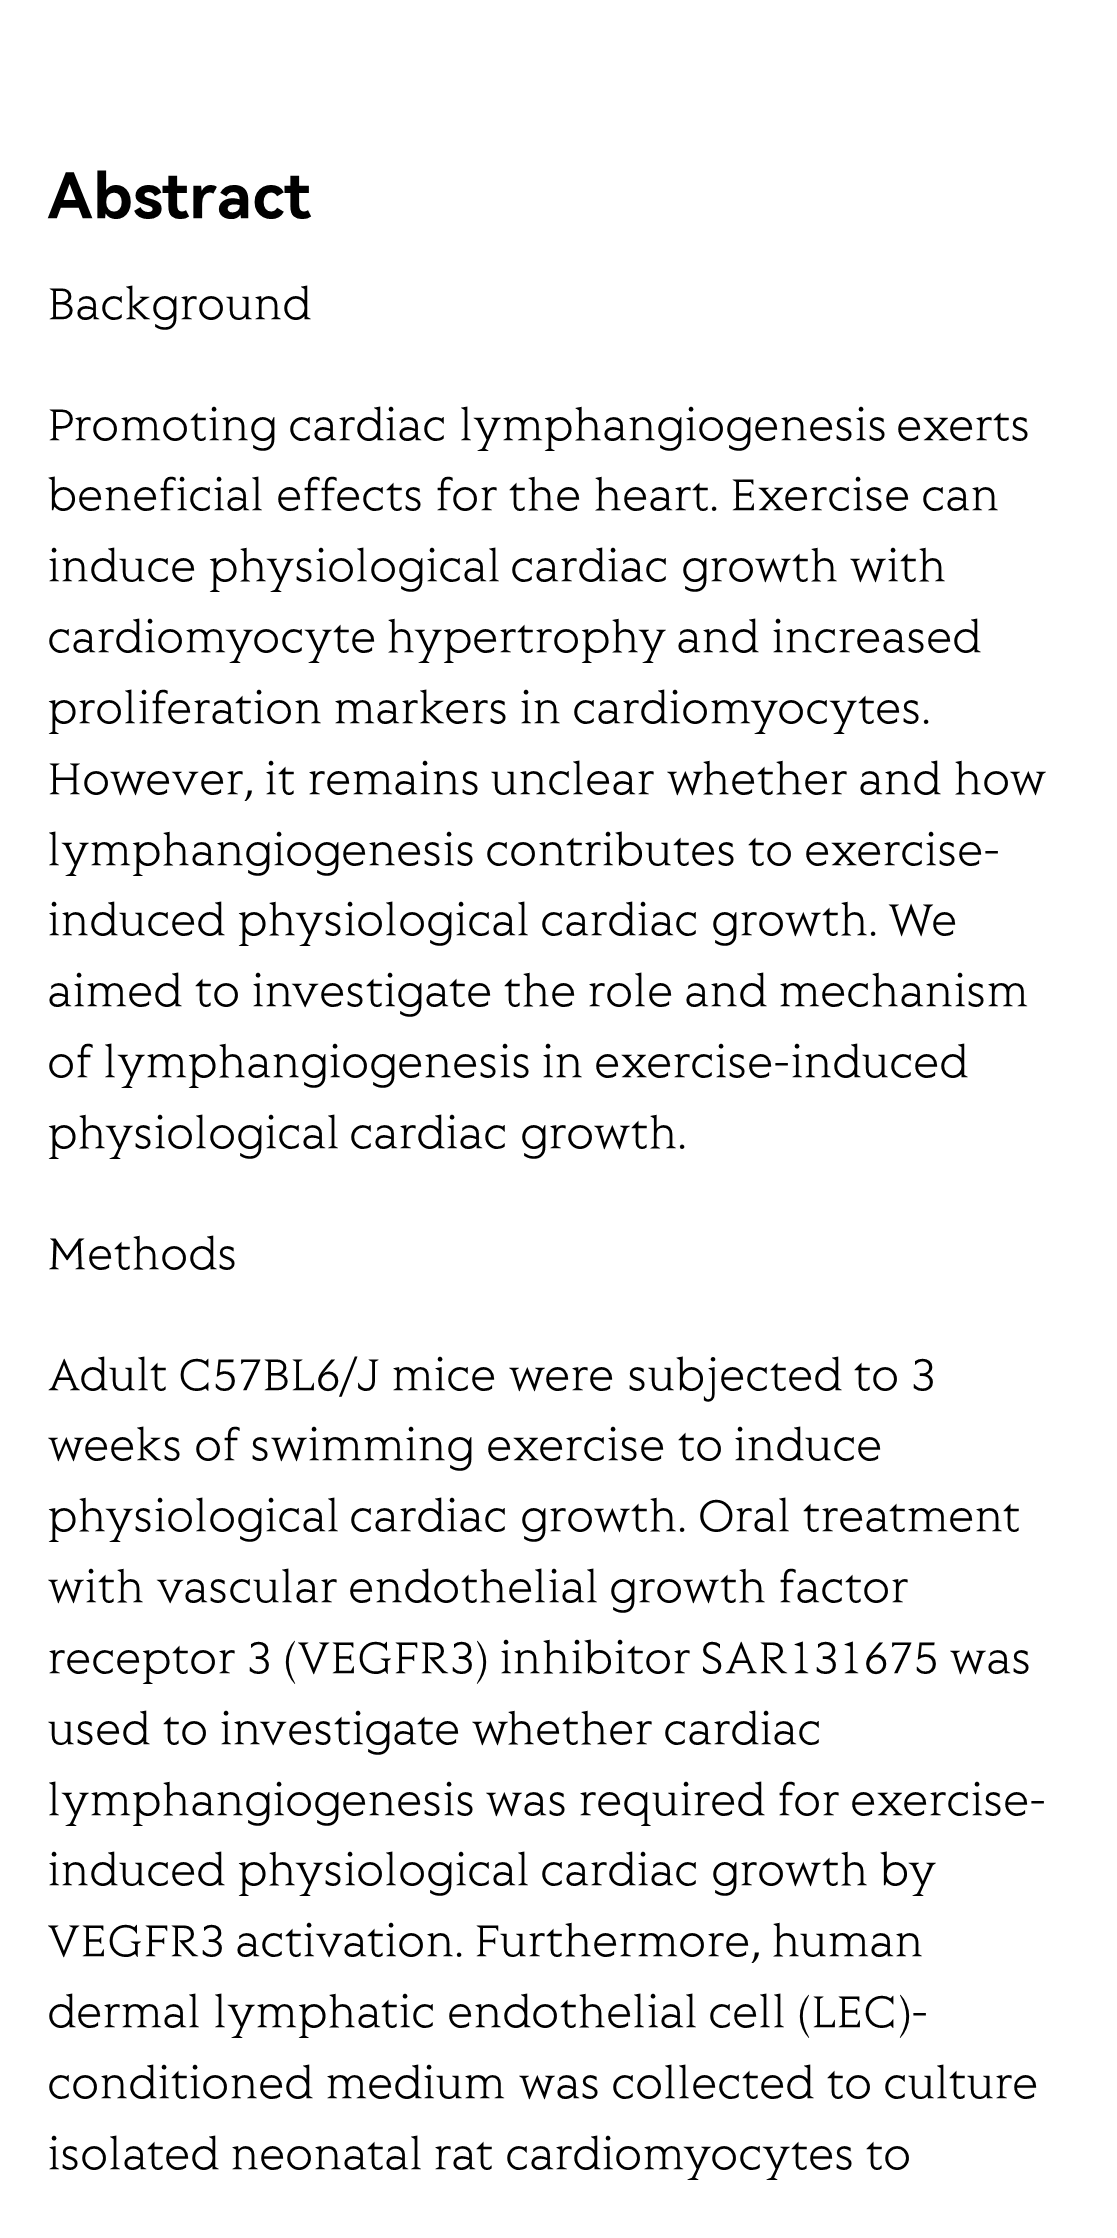 Lymphangiogenesis contributes to exercise-induced physiological cardiac growth_2